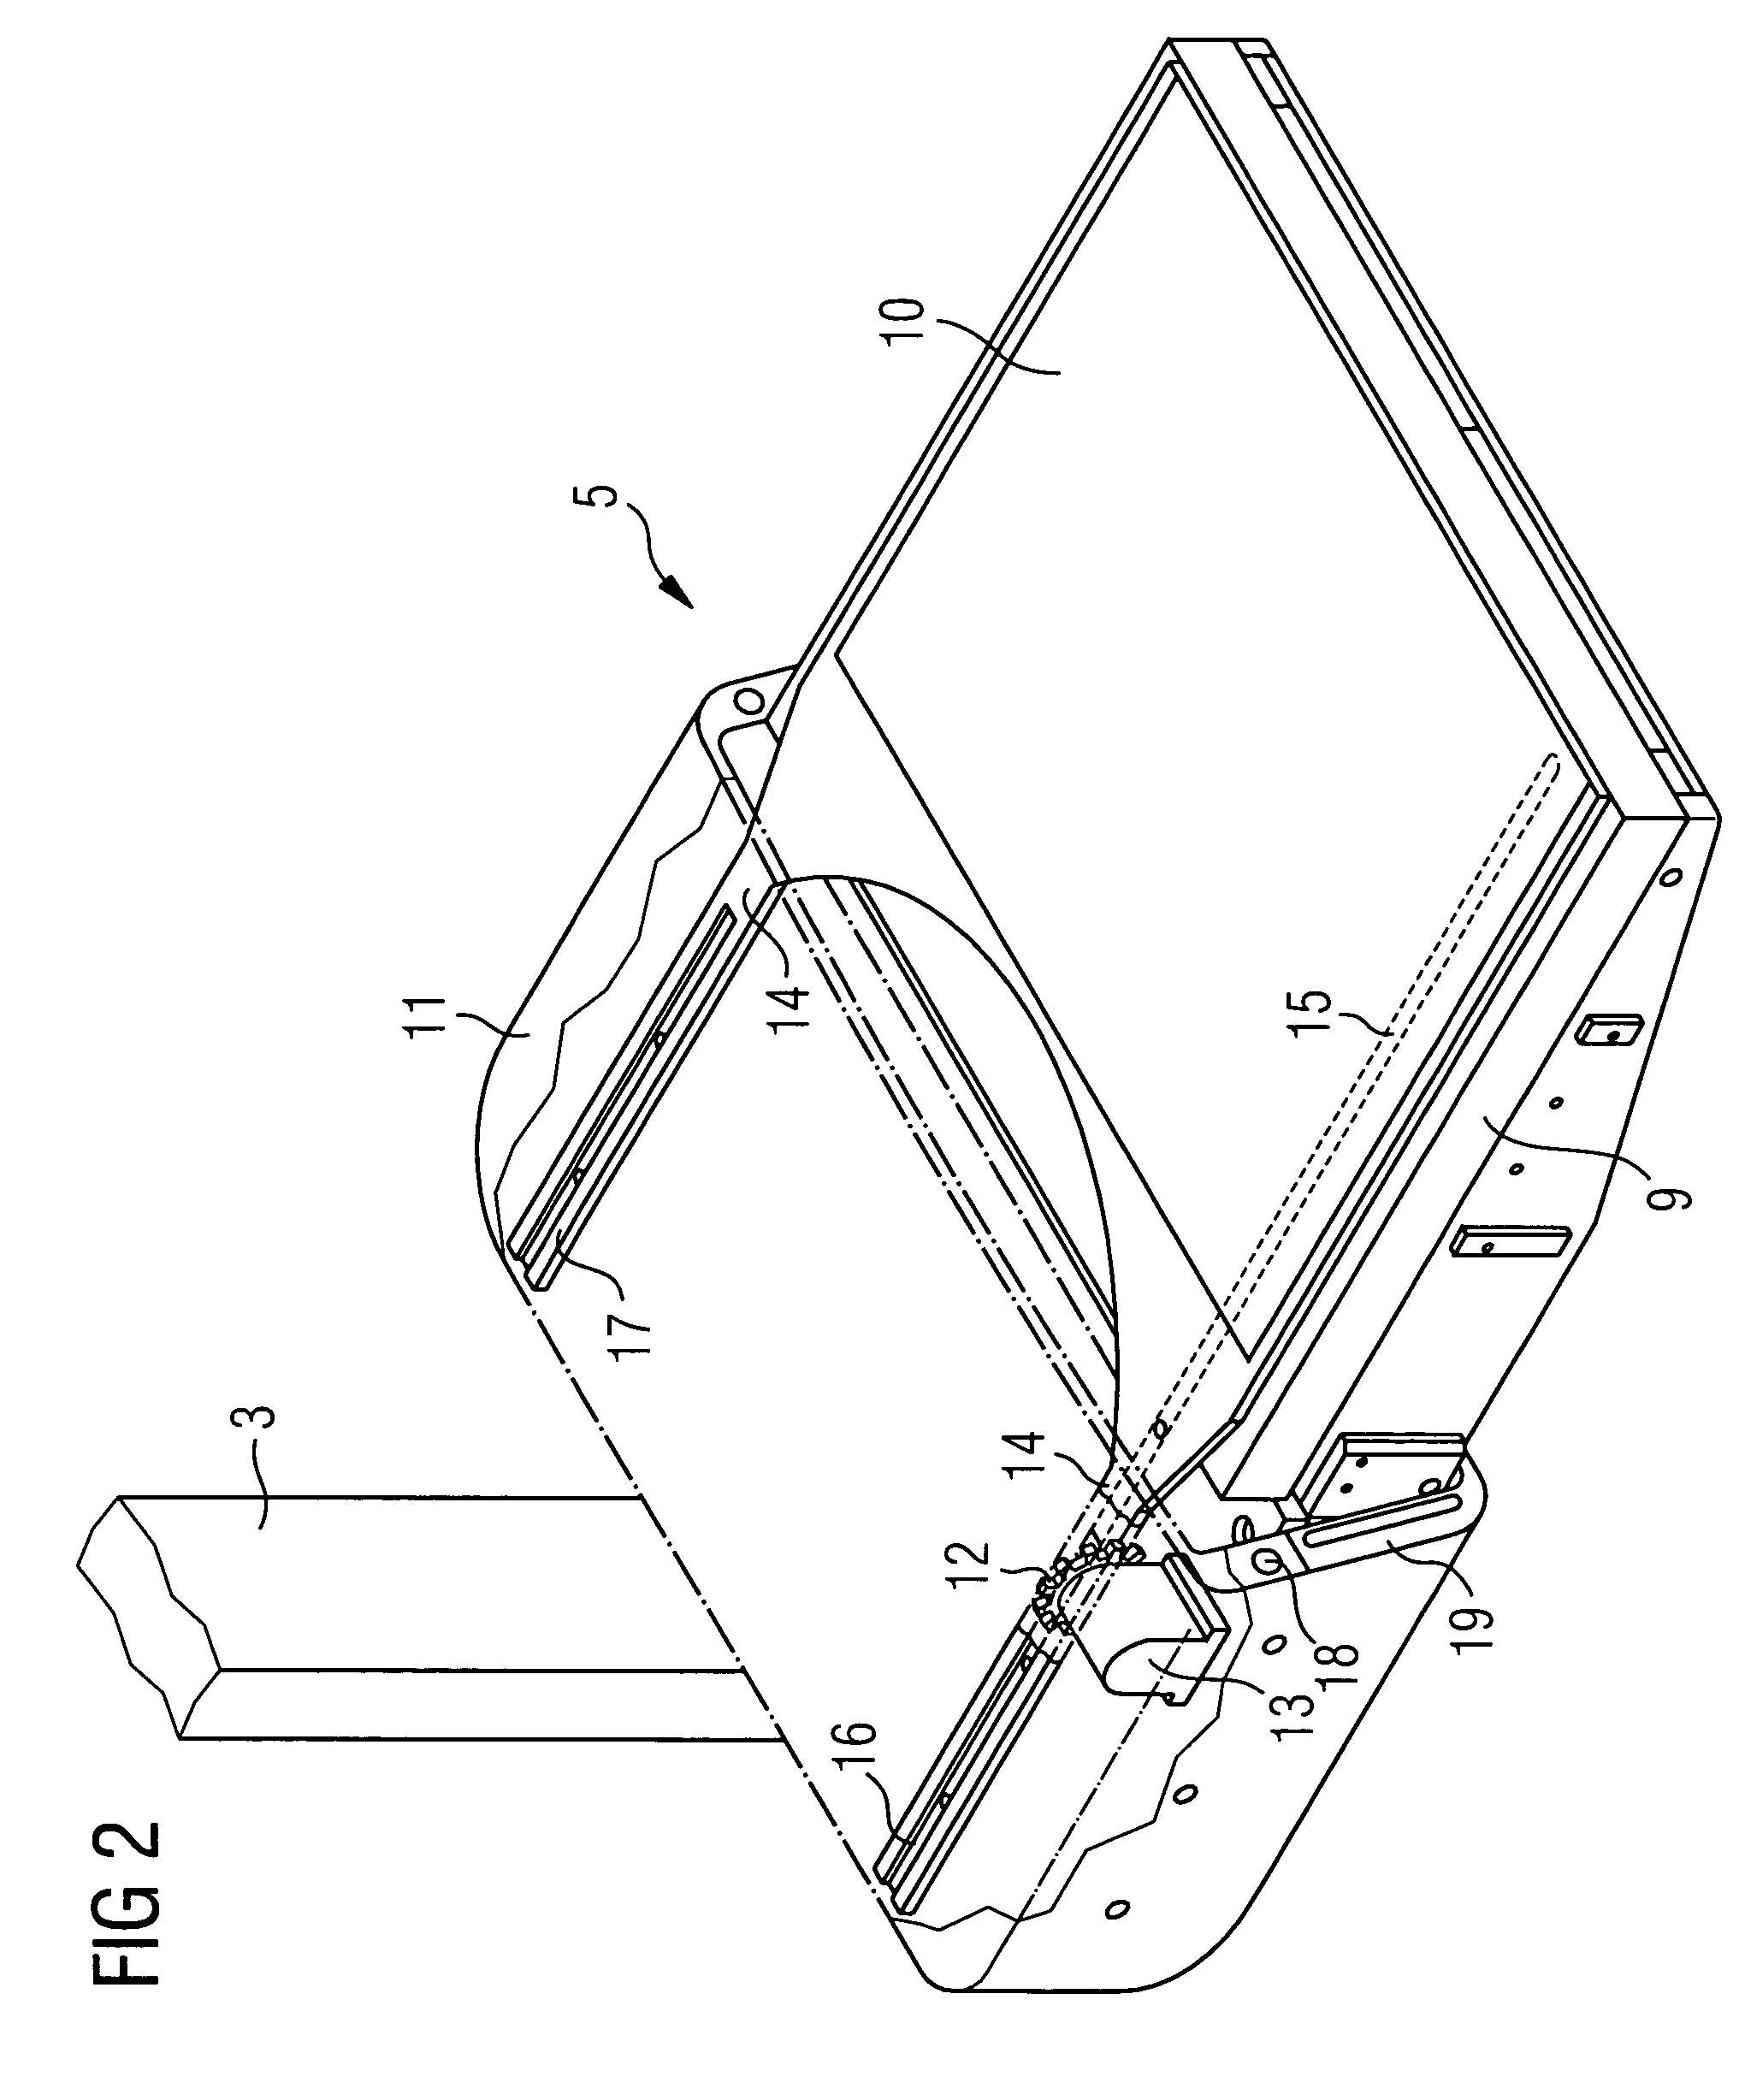 X-ray diagnostic device for mammography examinations